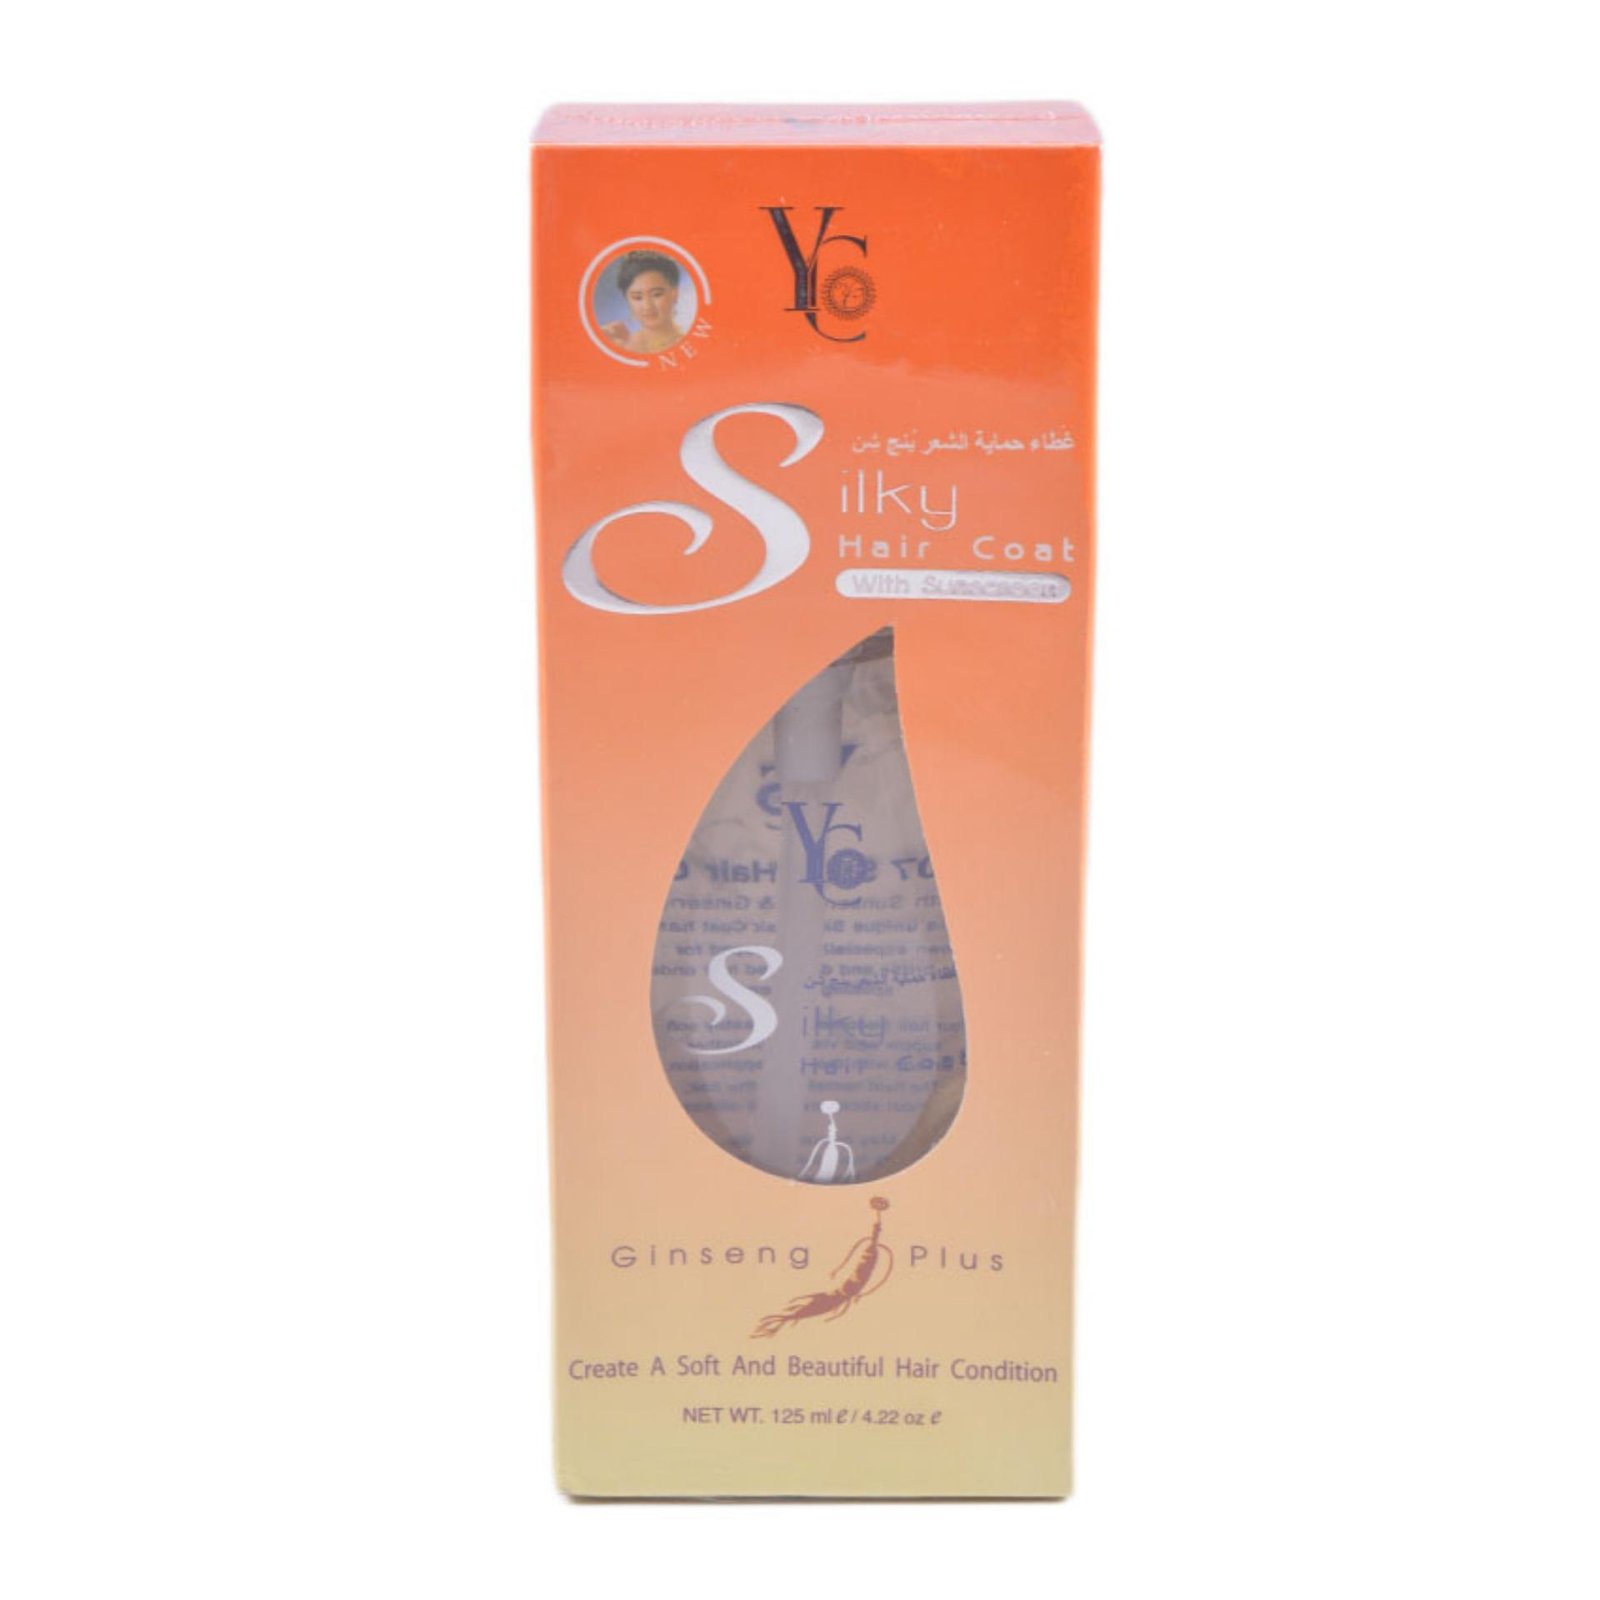 YC Thailand Hair Coat With Ginseng Root - Beauty Box